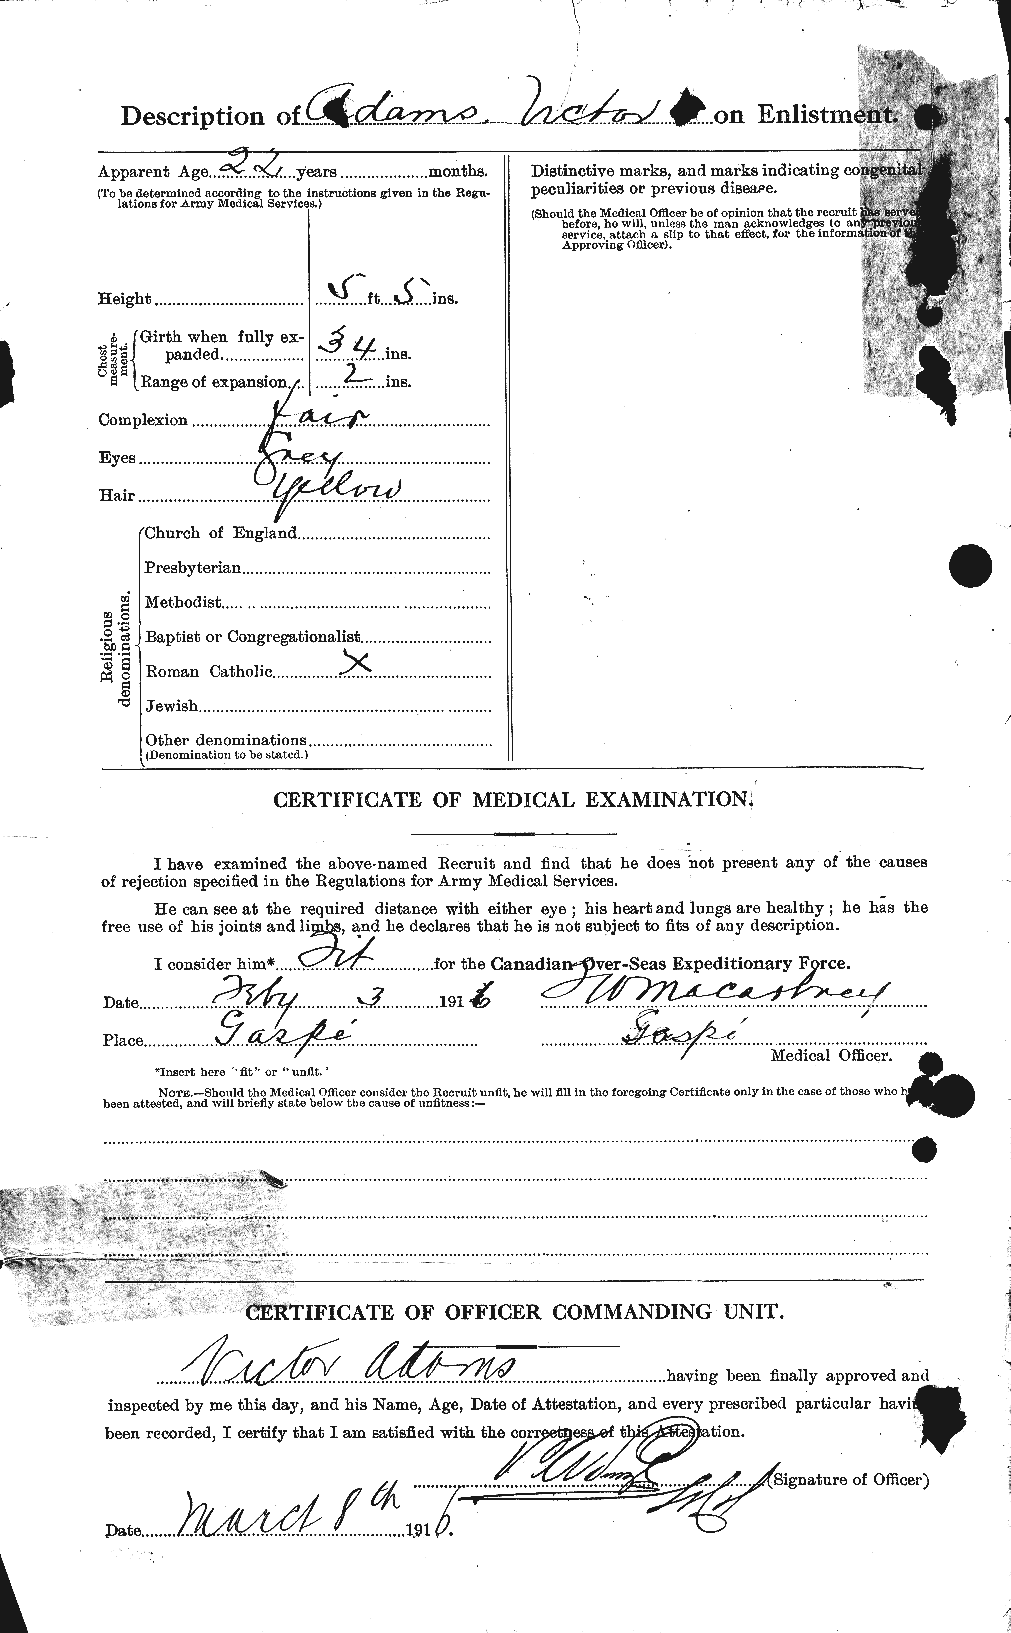 Personnel Records of the First World War - CEF 202184b